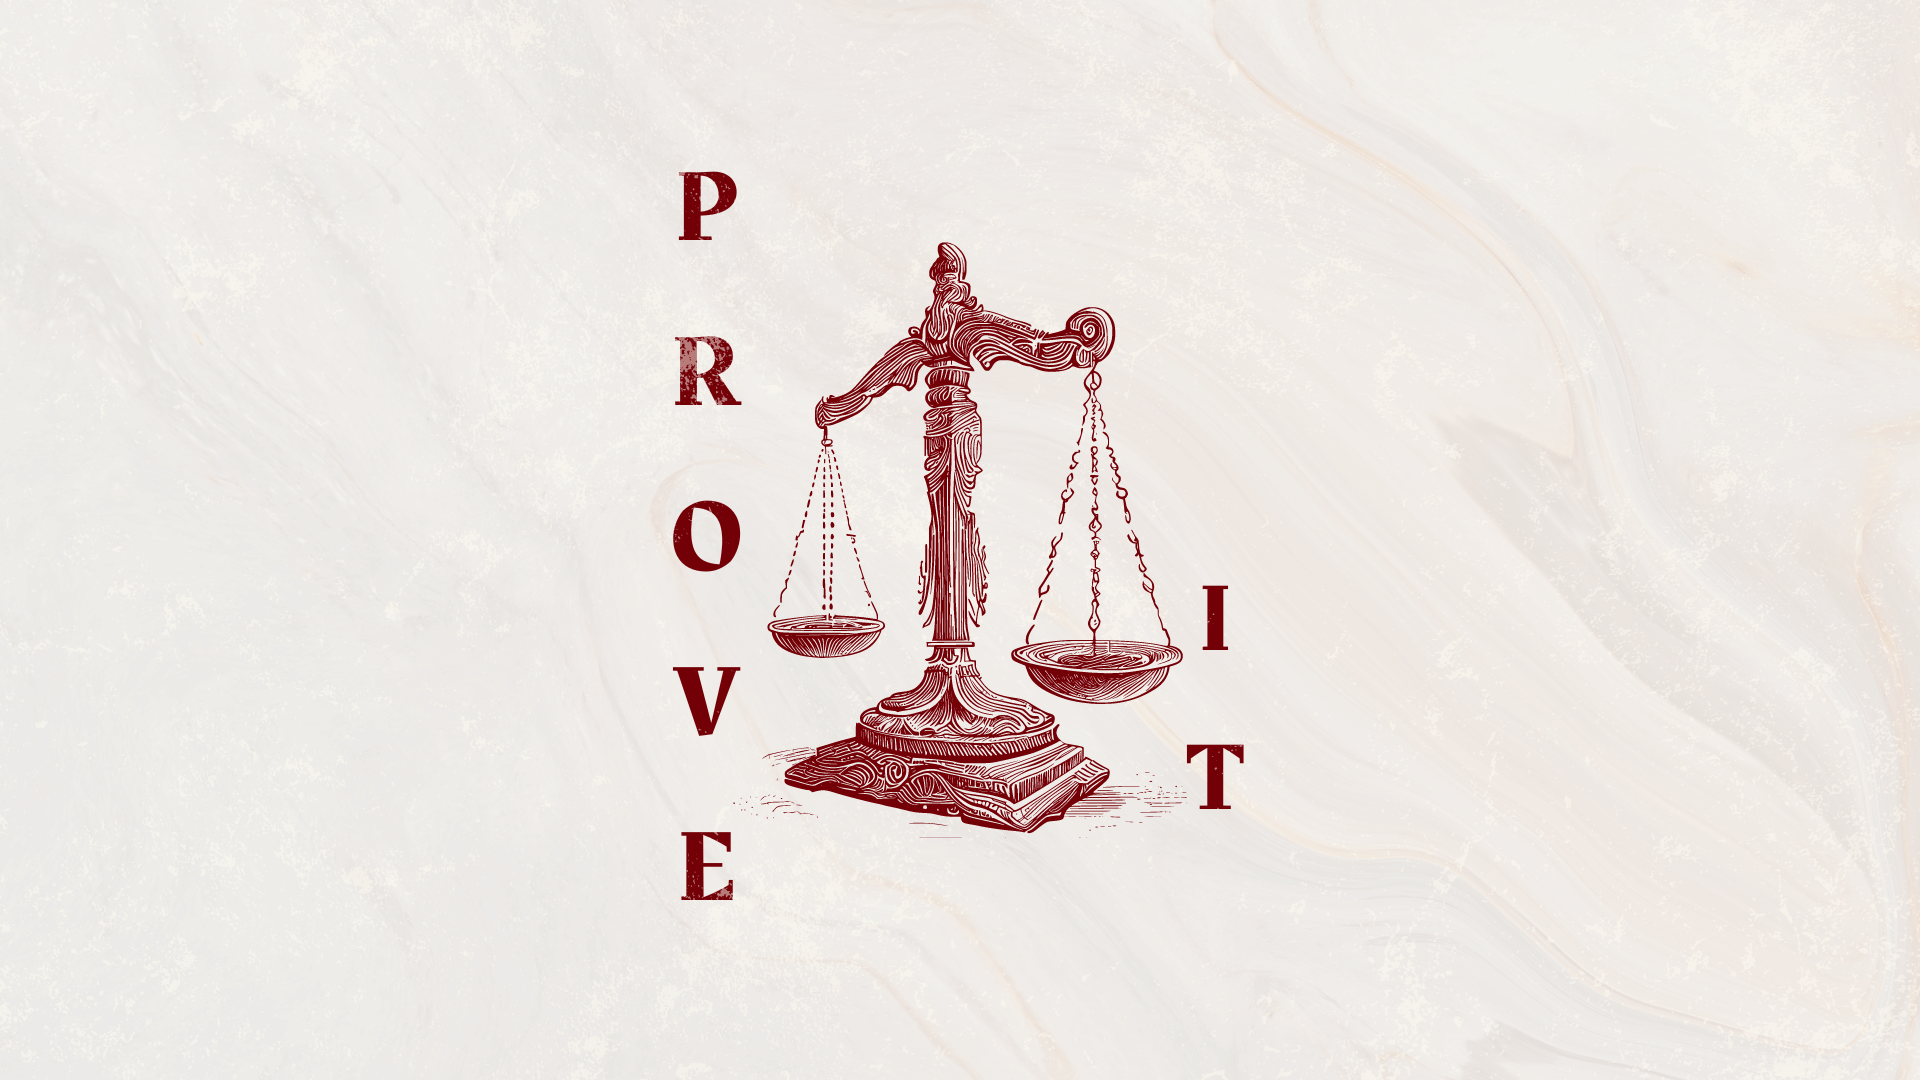 Prove It (The Power of Your Story)